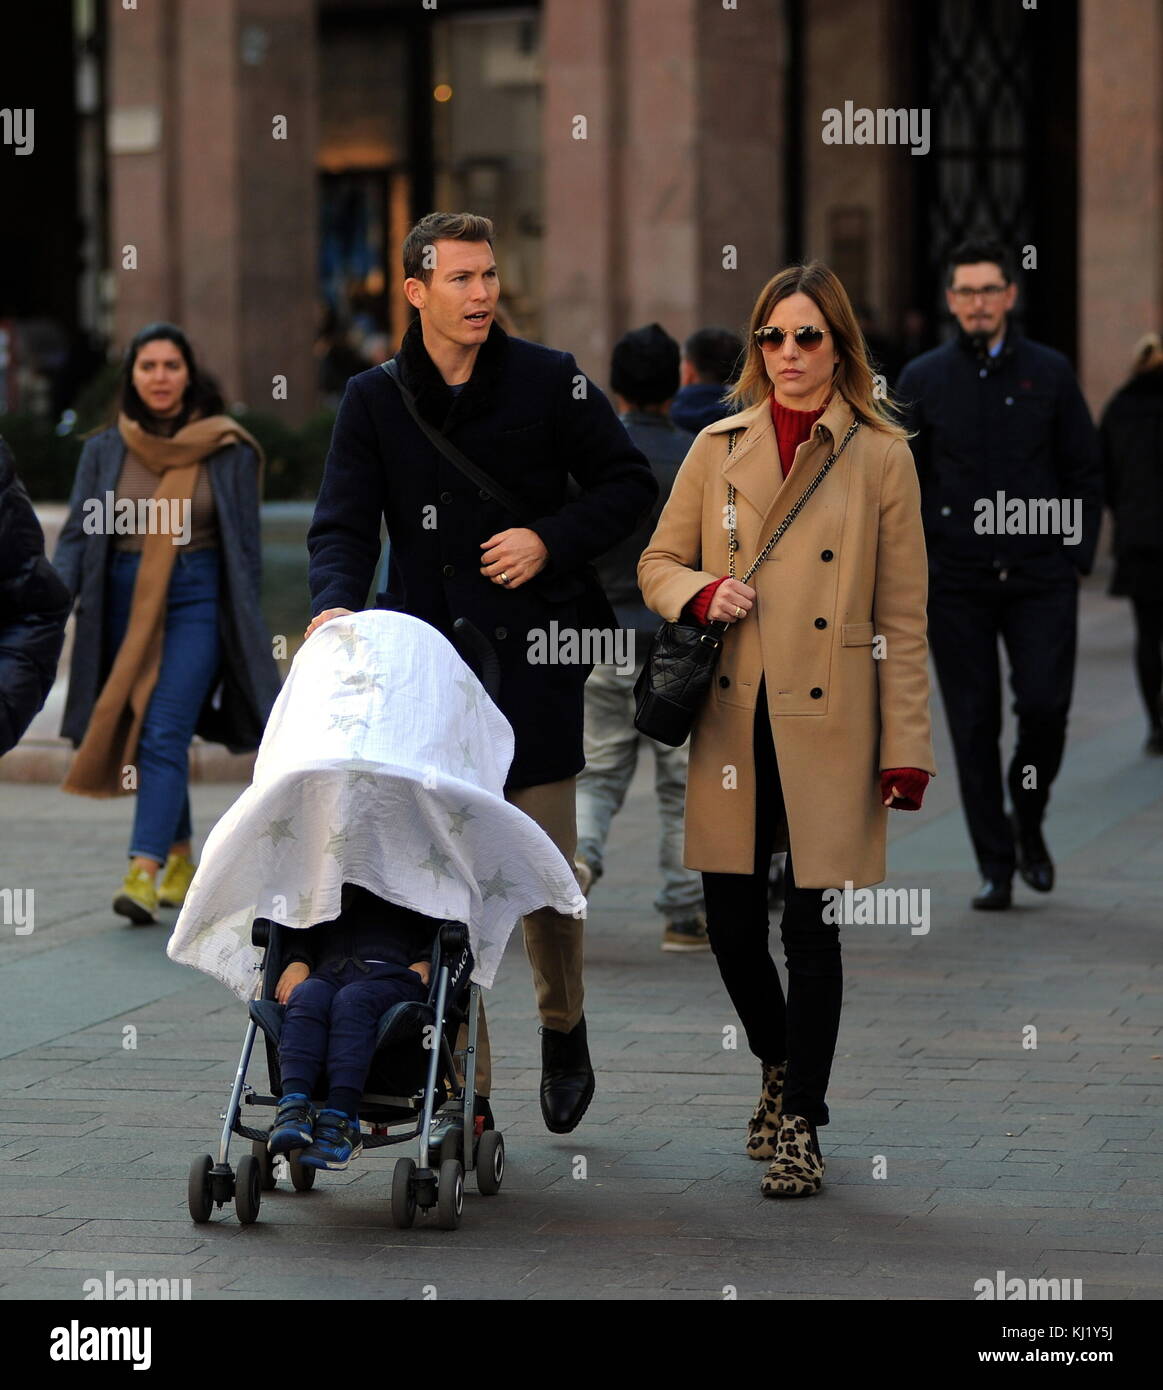 Milan, Stephan Lichtsteiner in the center with his wife and son The  defender of Juventus and Switzerland's national team, Stephan Lichtsteiner,  comes to the center for a few hours of relaxation. Walking